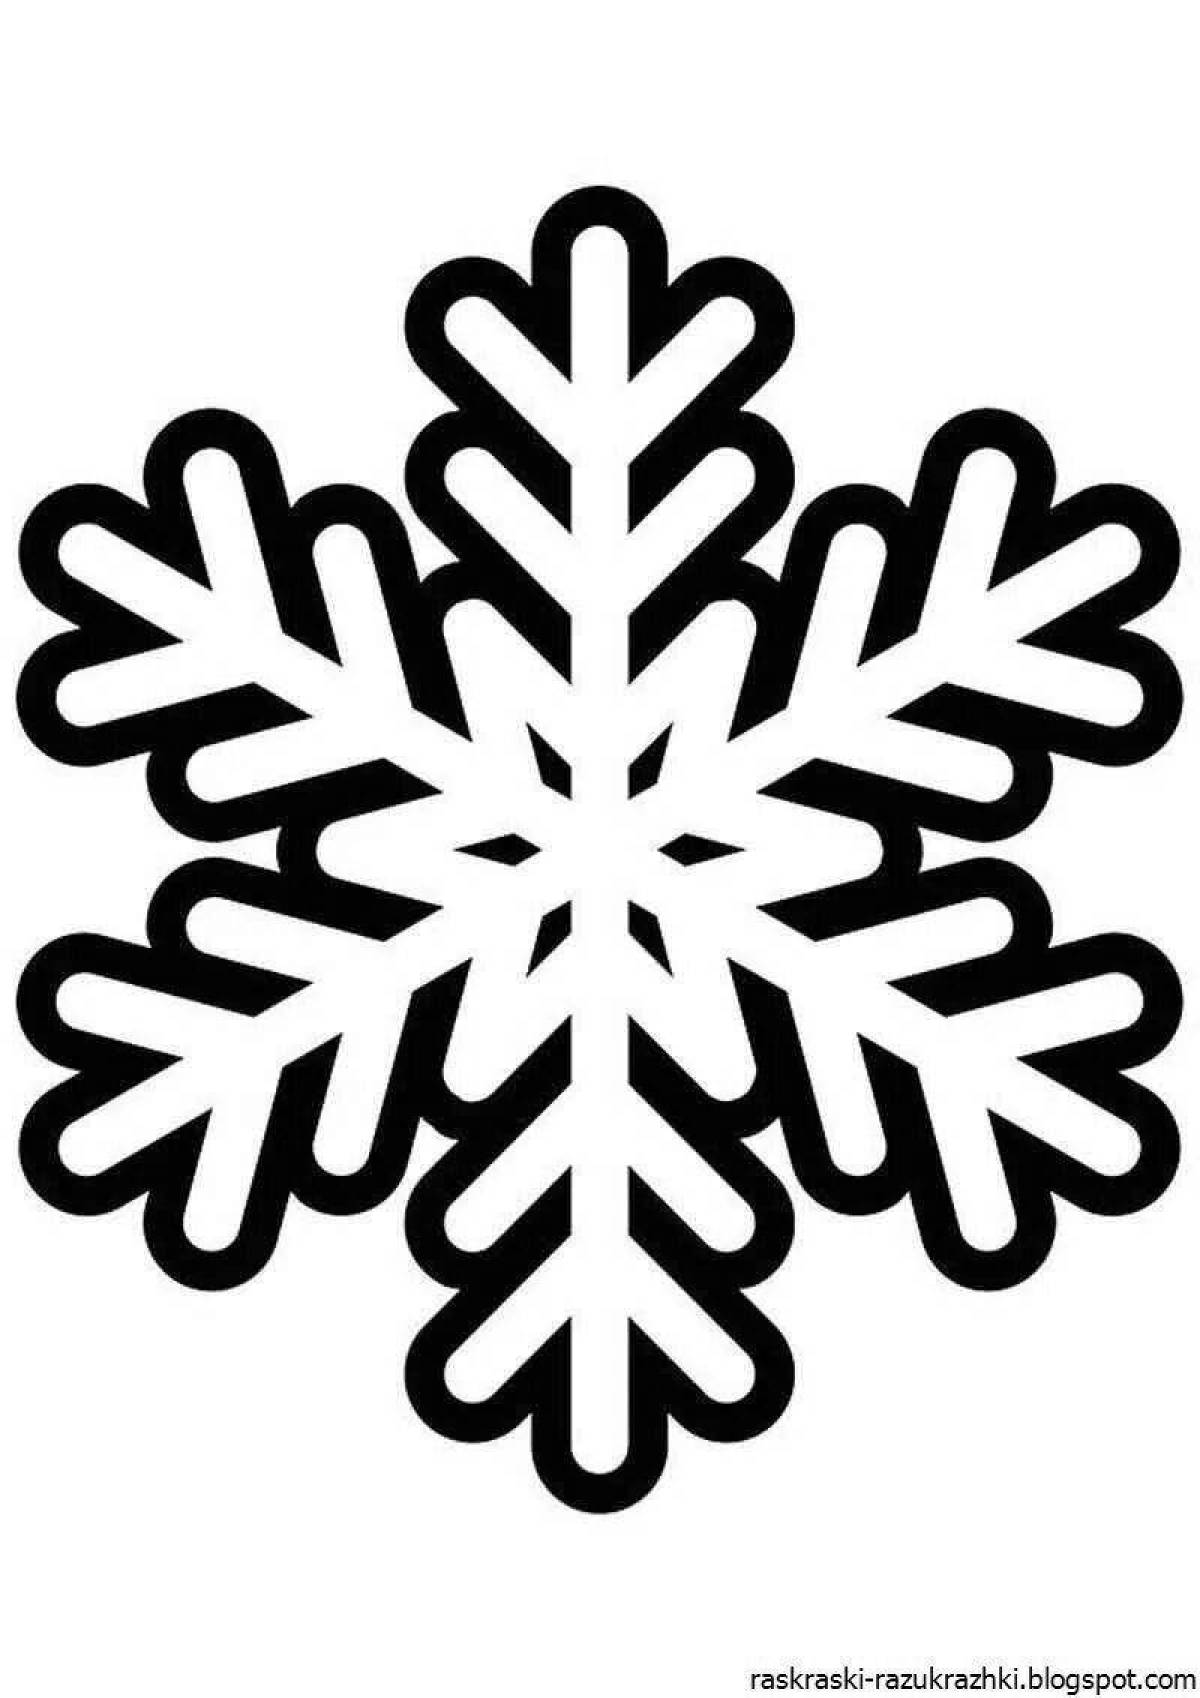 Shining snowflake coloring book for kids